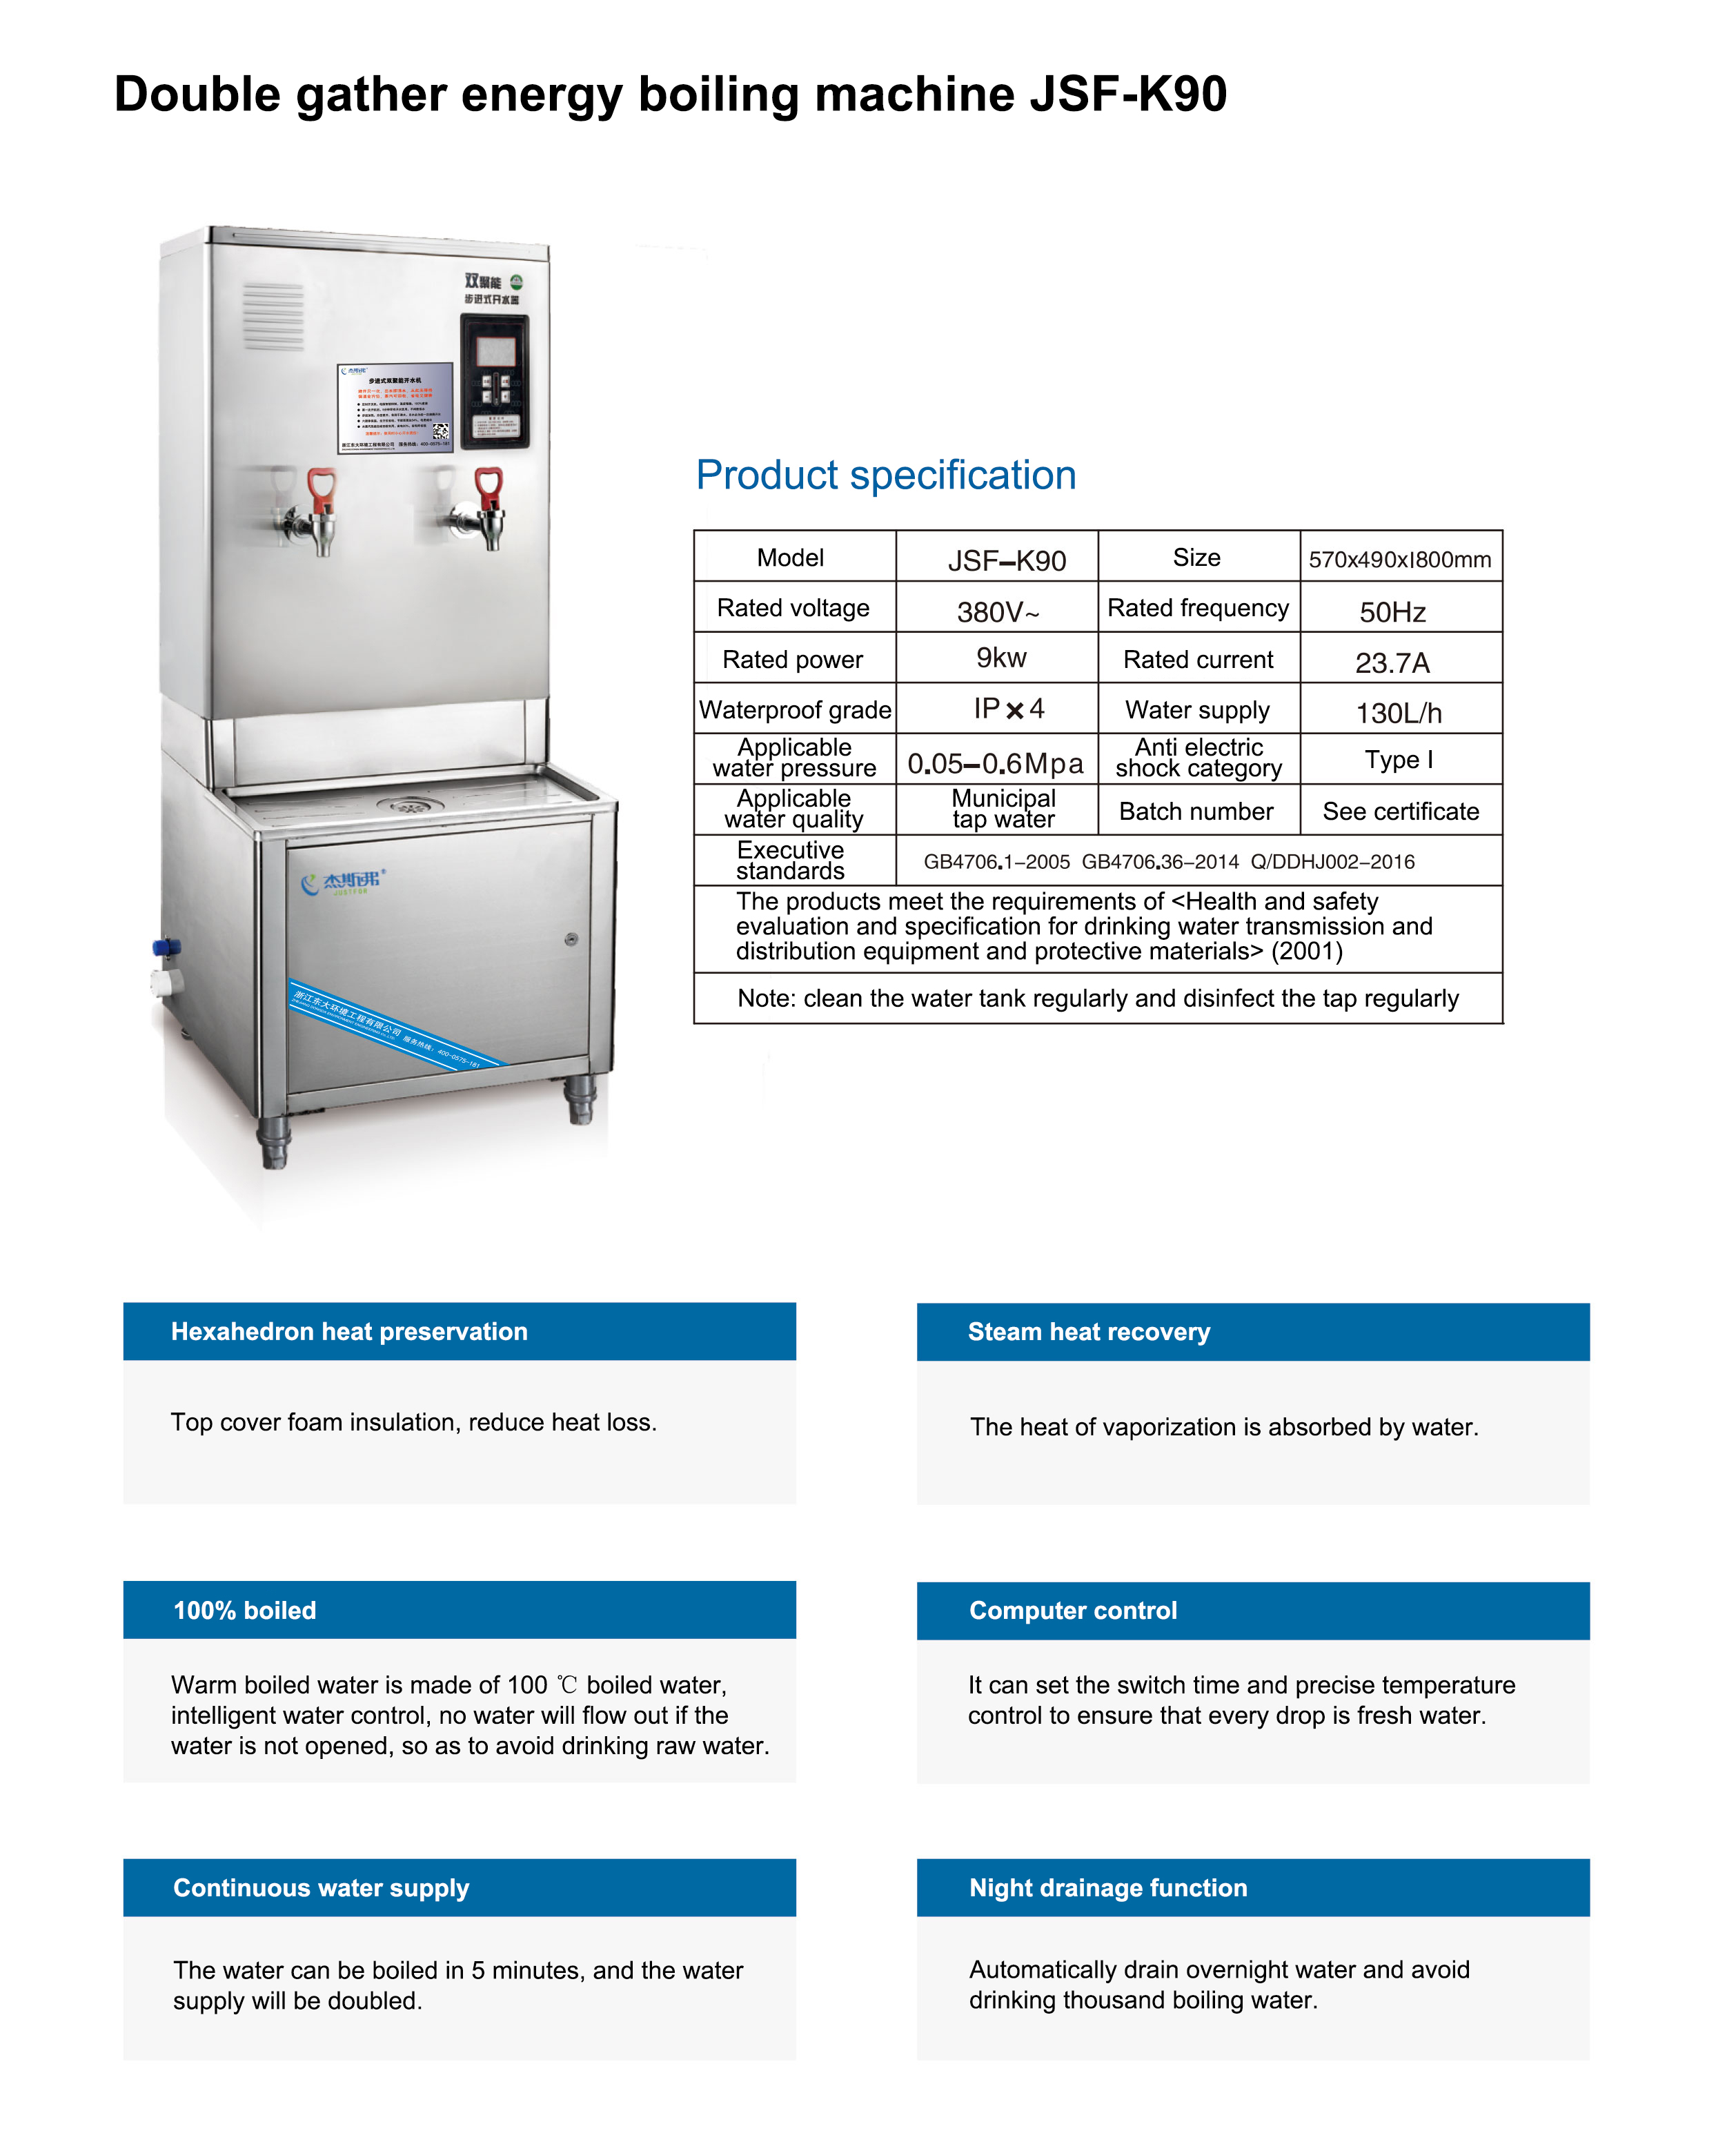 Double gather energy boiling machine（JSF-K90）